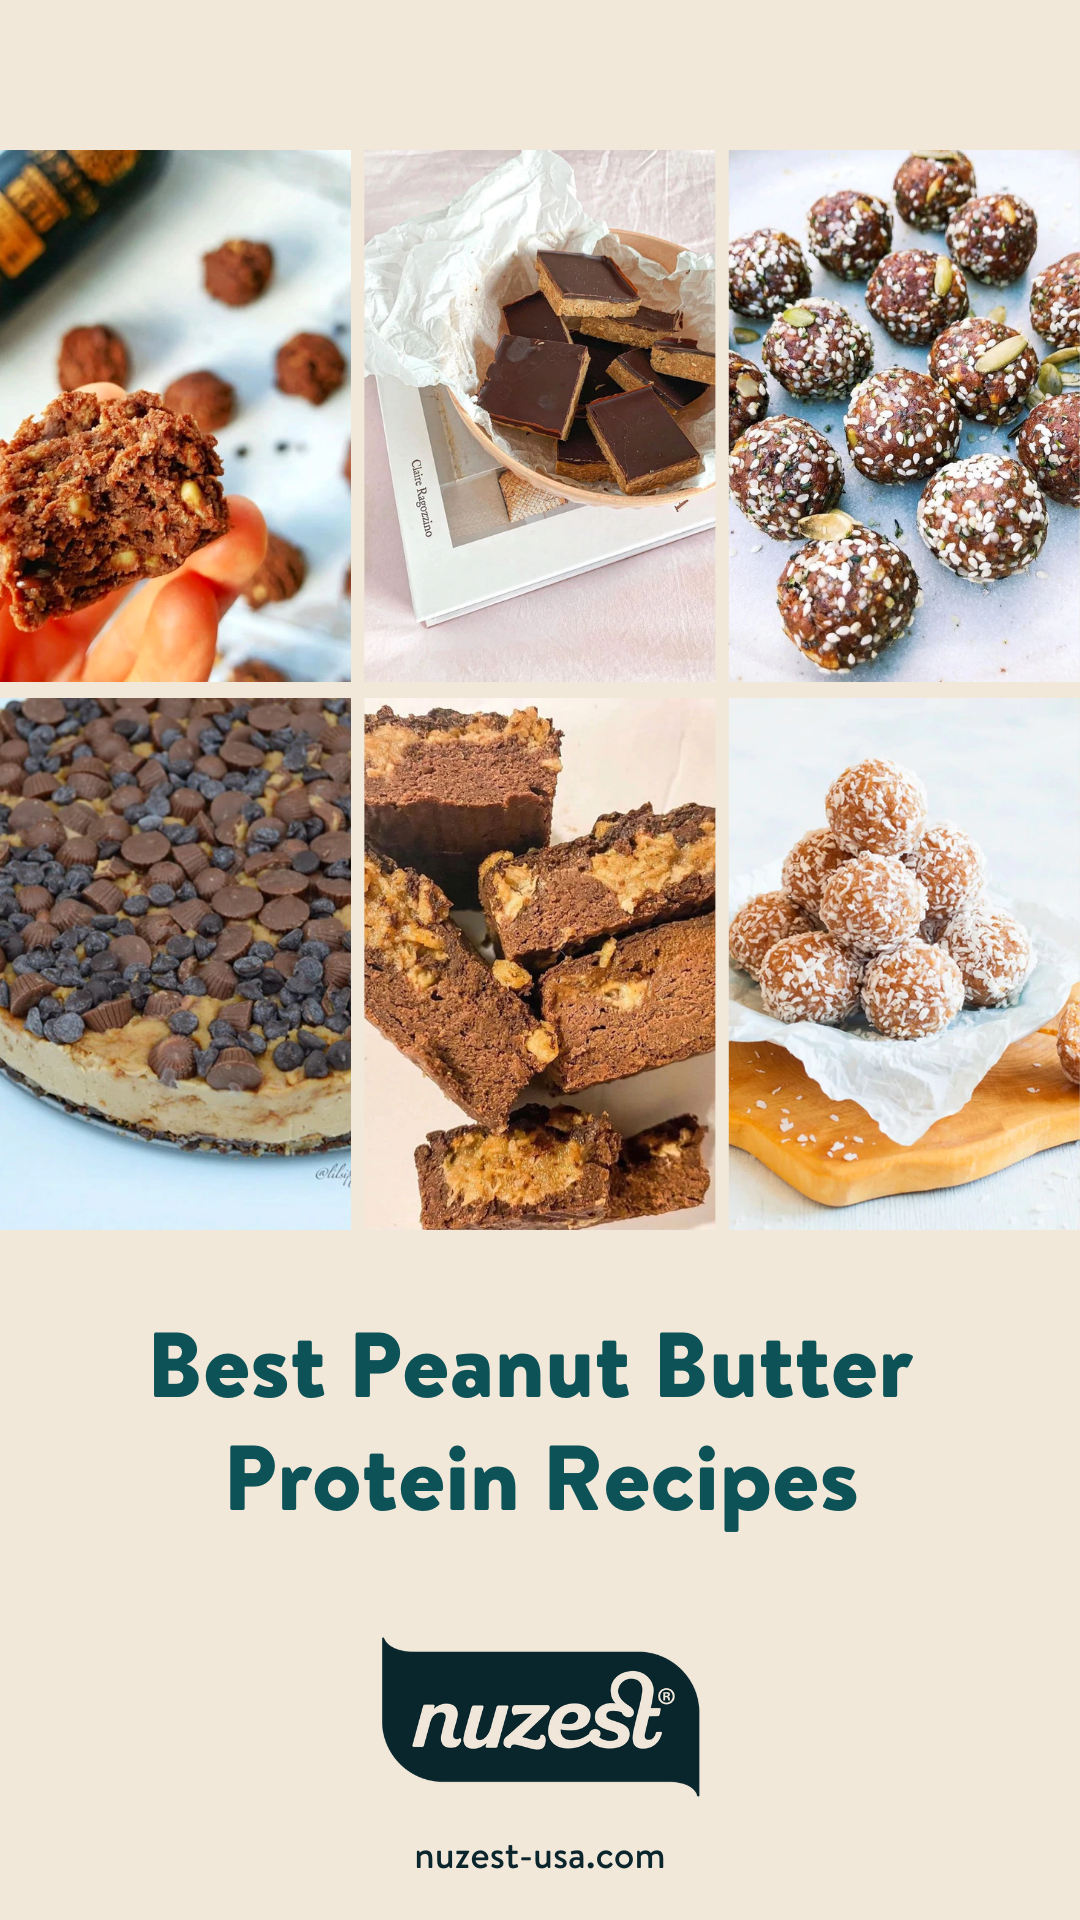 27 Best Protein Recipes with Peanut Butter